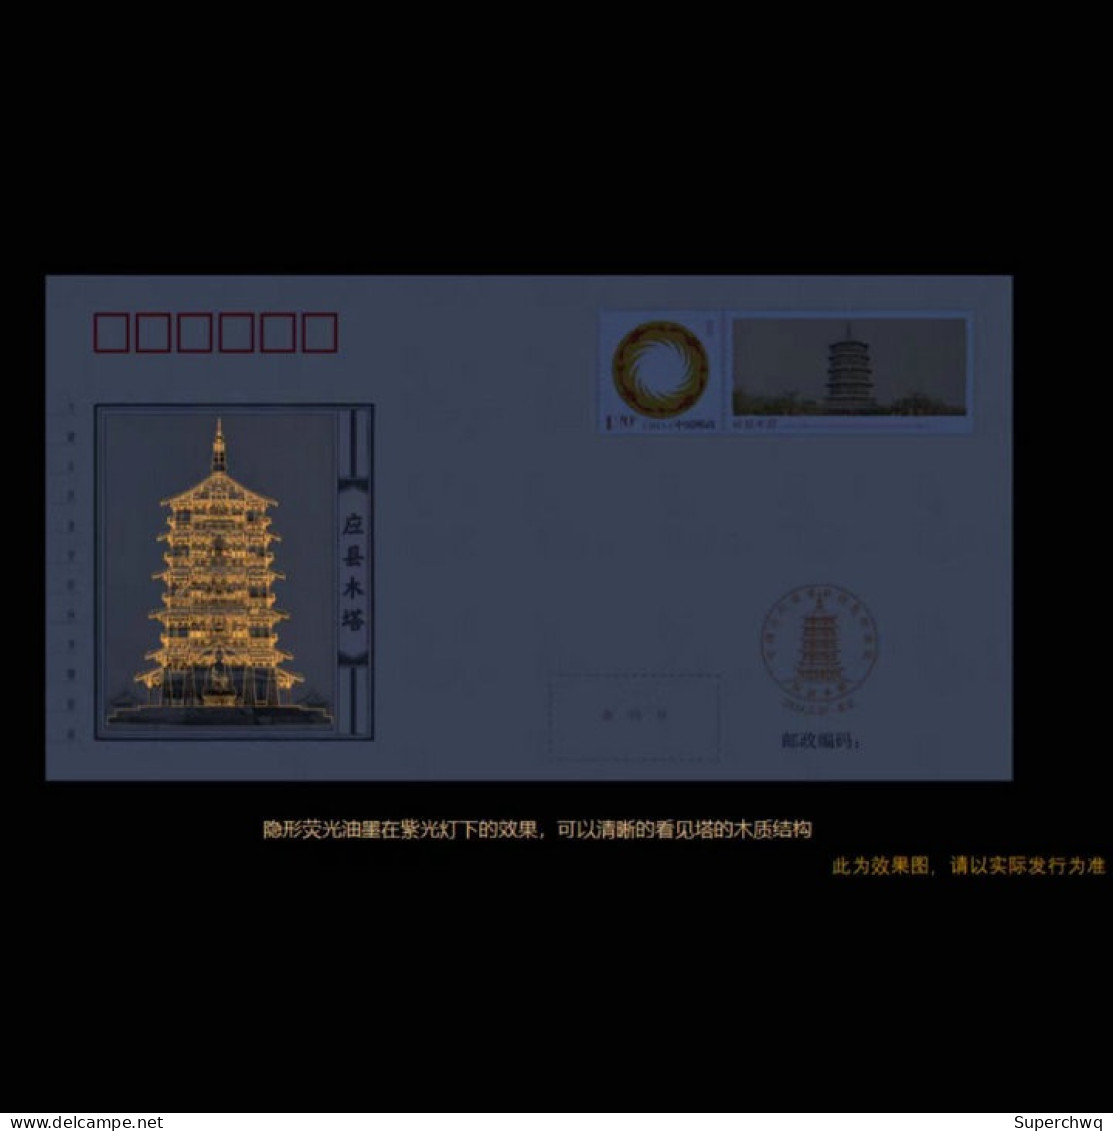 China Cover The Commemorative Cover Of "Qiaosi Tiangong - Important Scientific And Technological Inventions And Creation - Brieven En Documenten